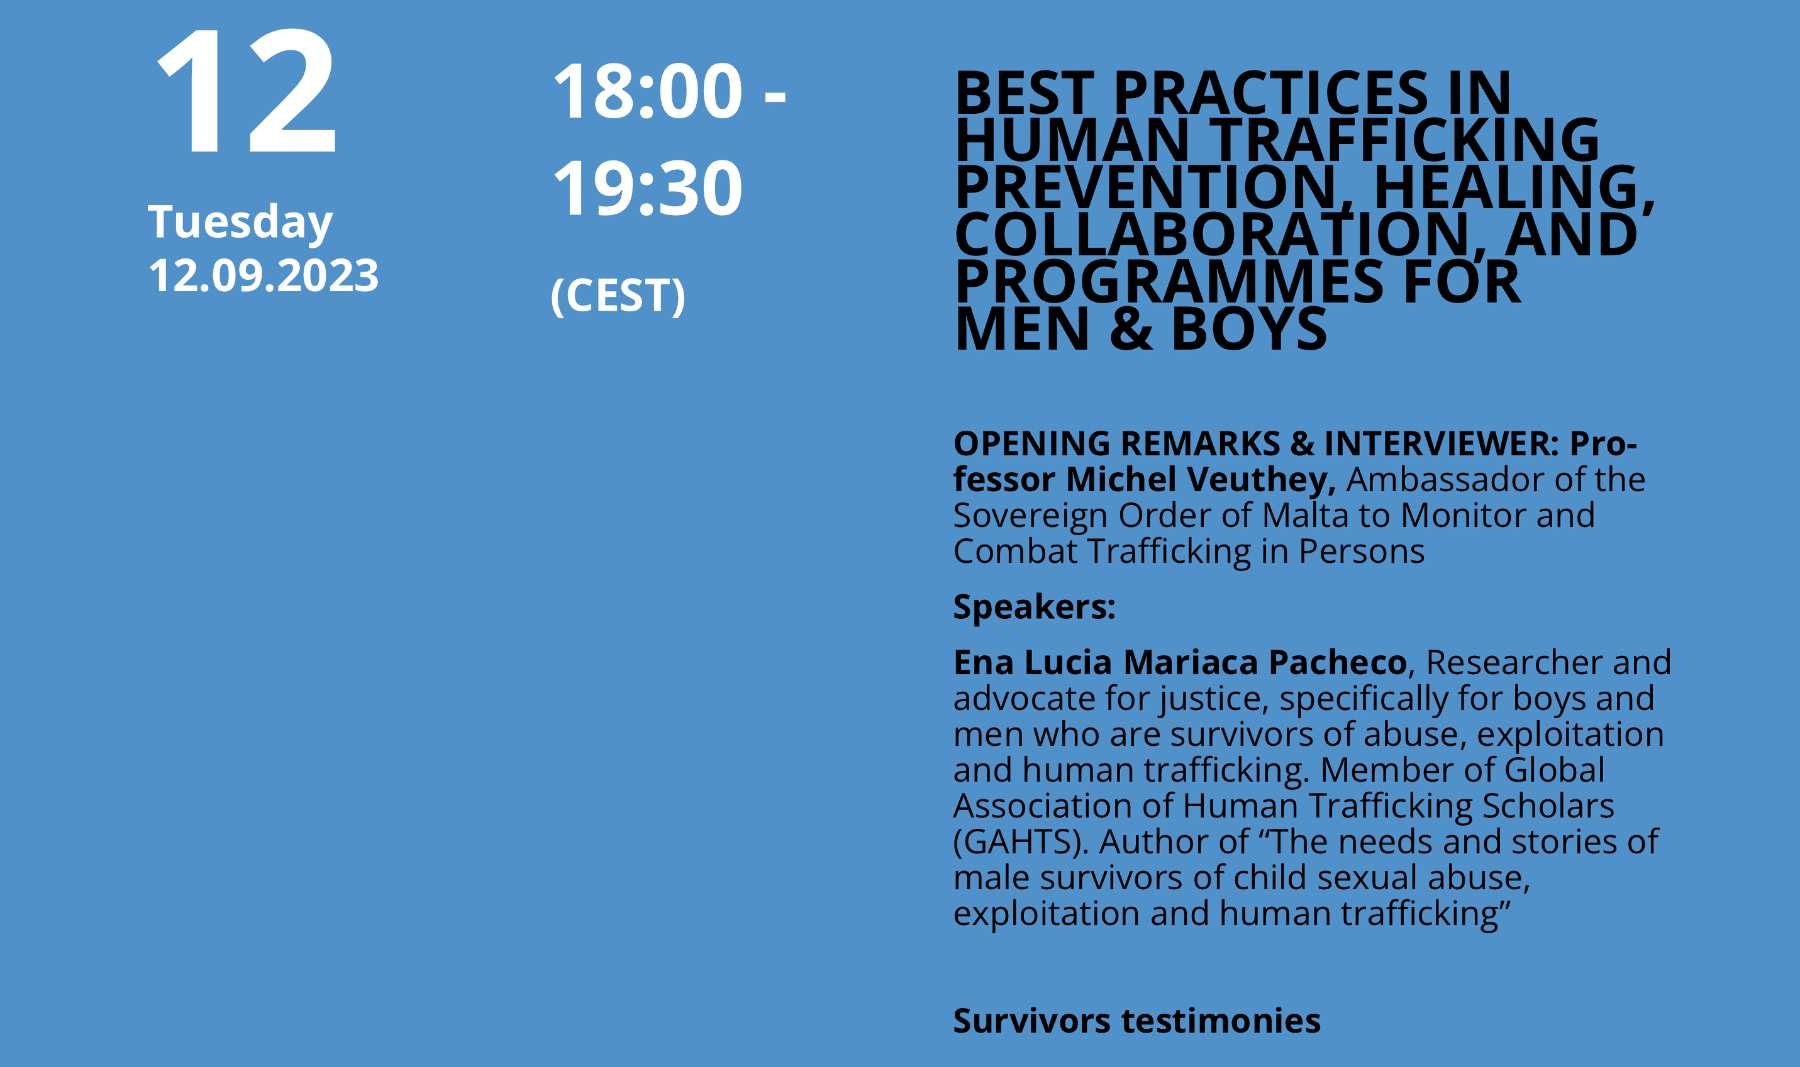 Our next webinar – Best Practices In Human Trafficking Prevention, Healing, Collaboration, And Programmes For Men & Boys